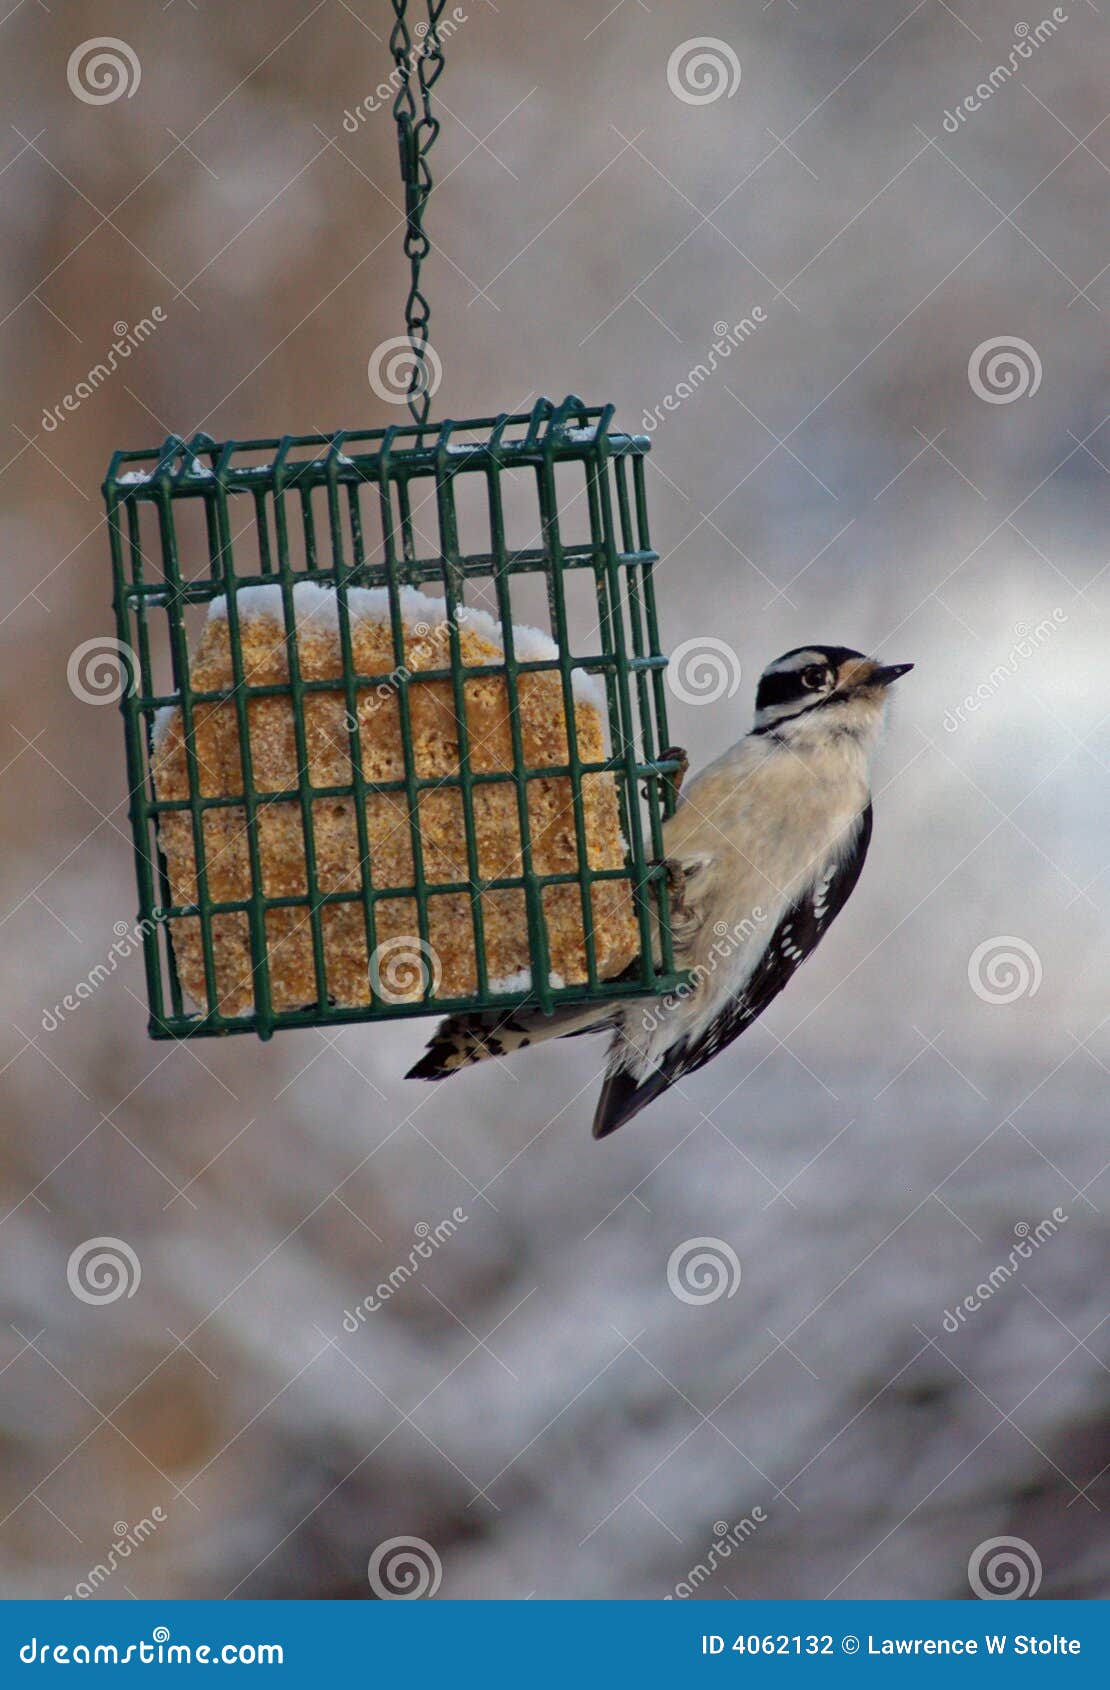 downy woodpecker hanging on